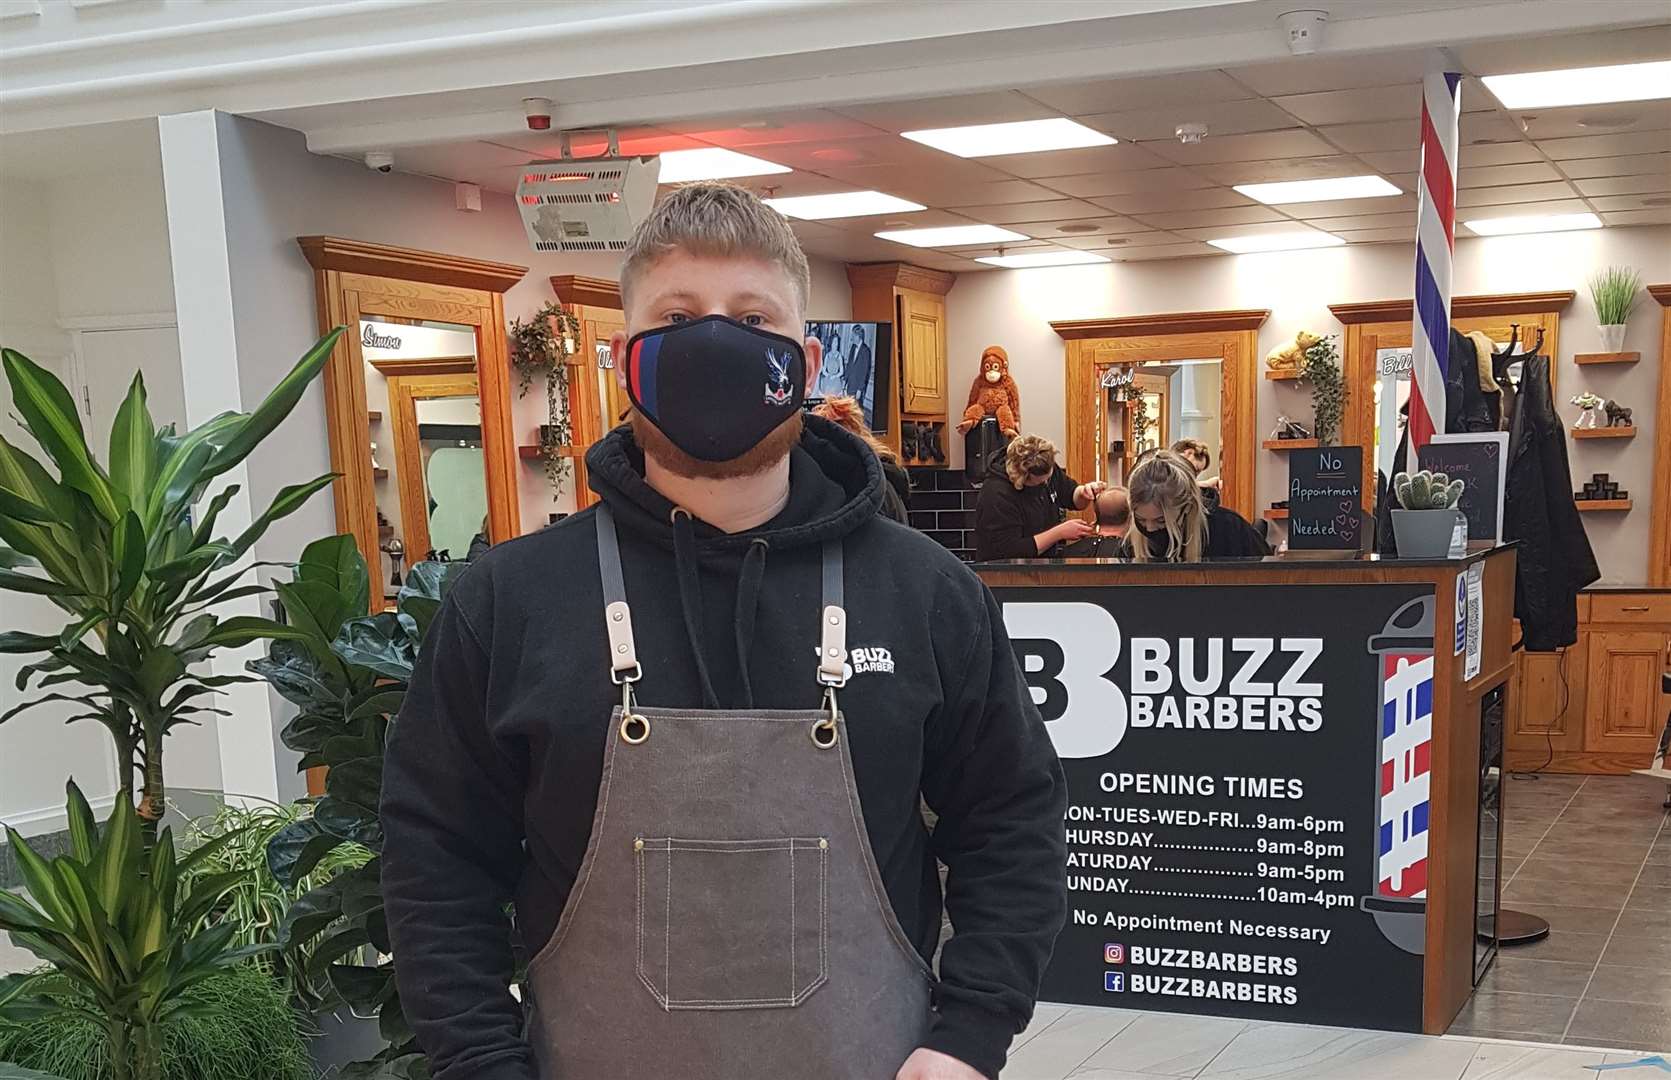 Manager Billy Fowler at Buzz Barbers in Tunbridge Wells